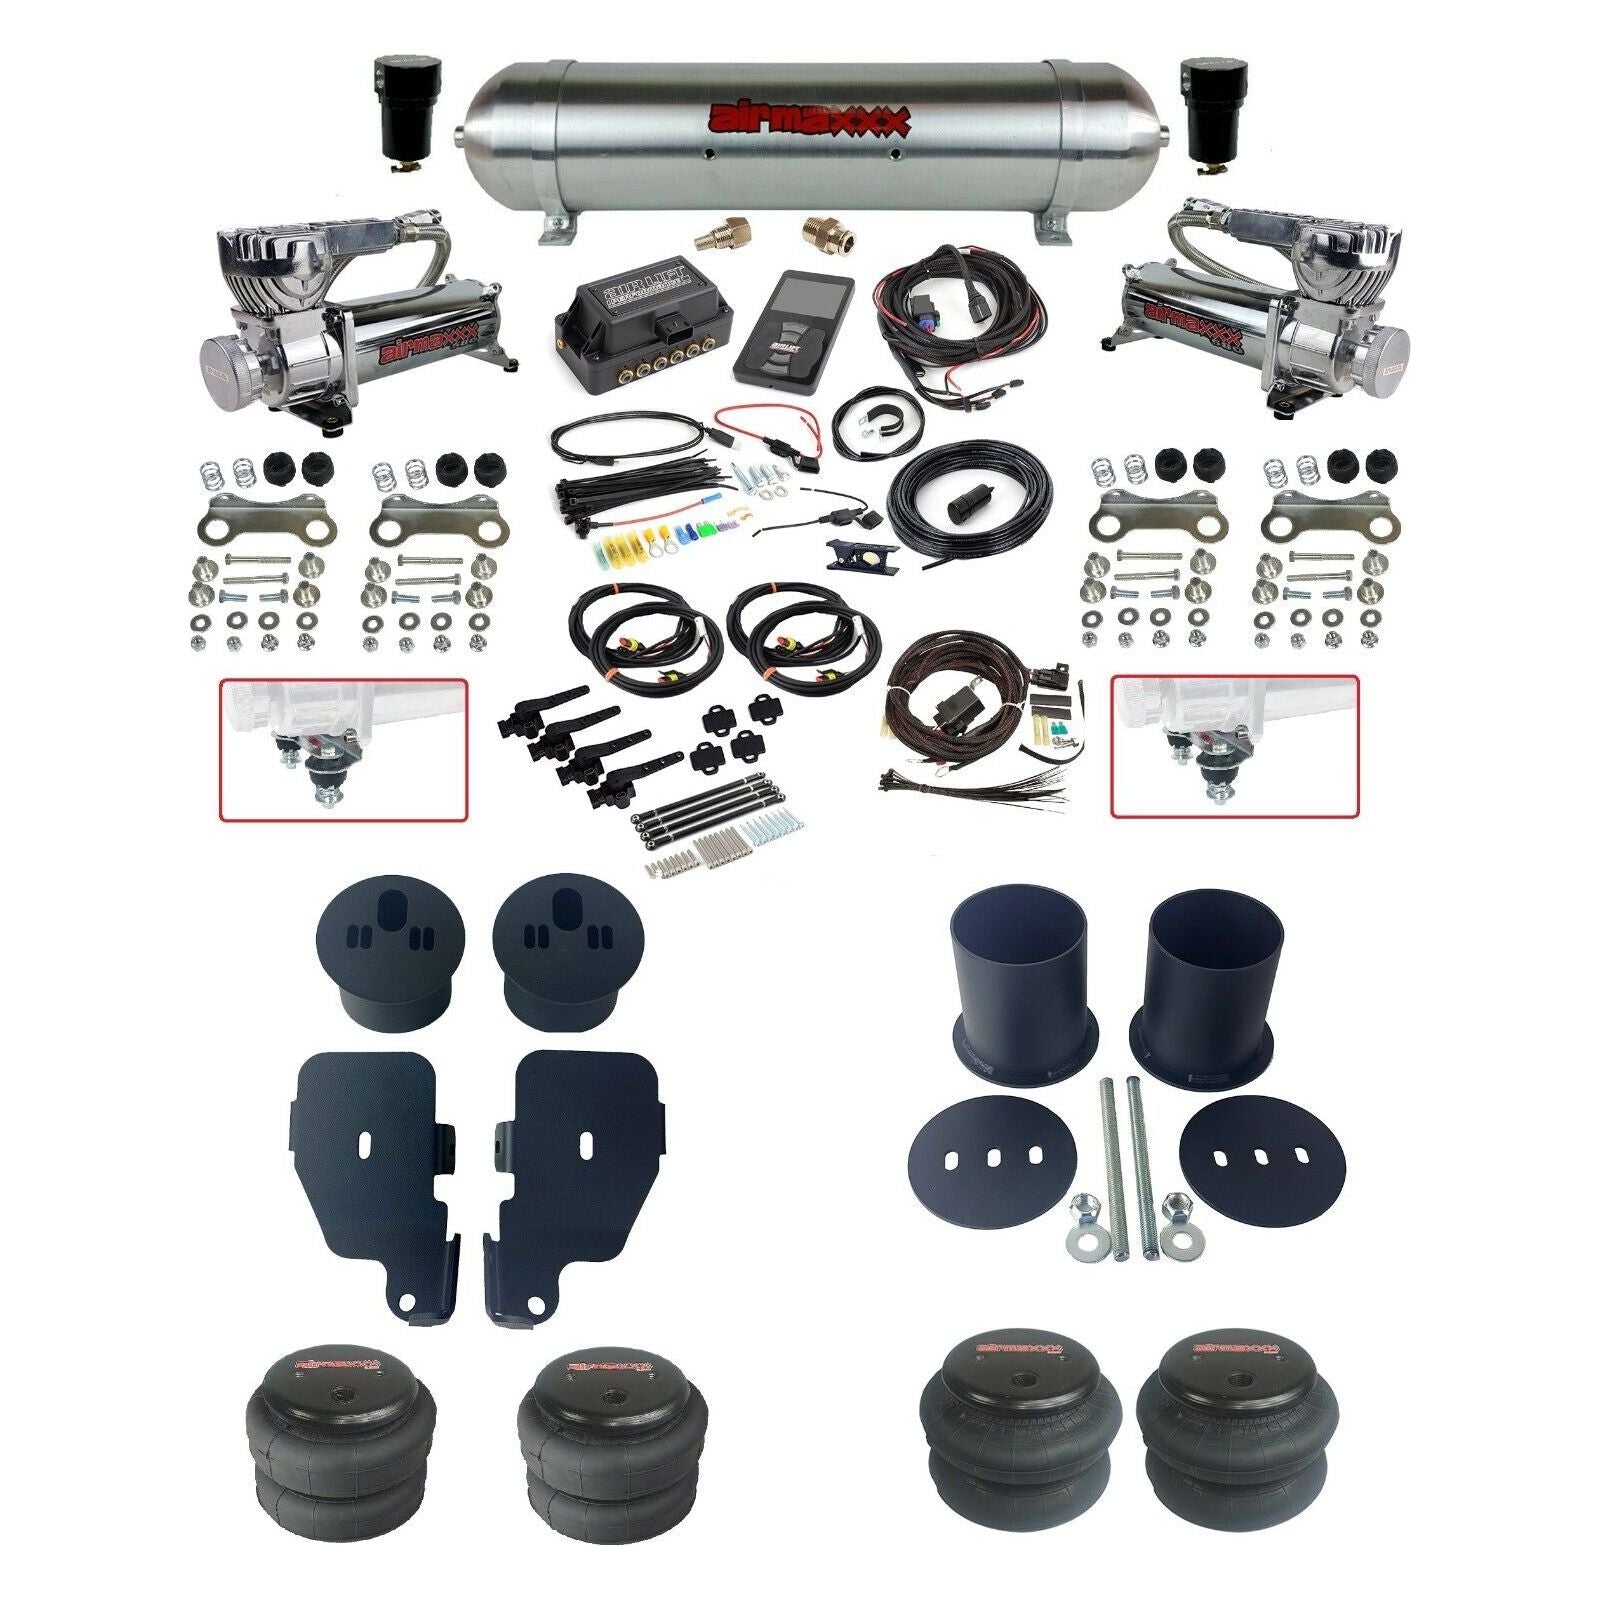 Complete 3/8 Air Suspension Kit with Air Lift 27695 3H & Chrome 580 Fits 1965-1970 Impala